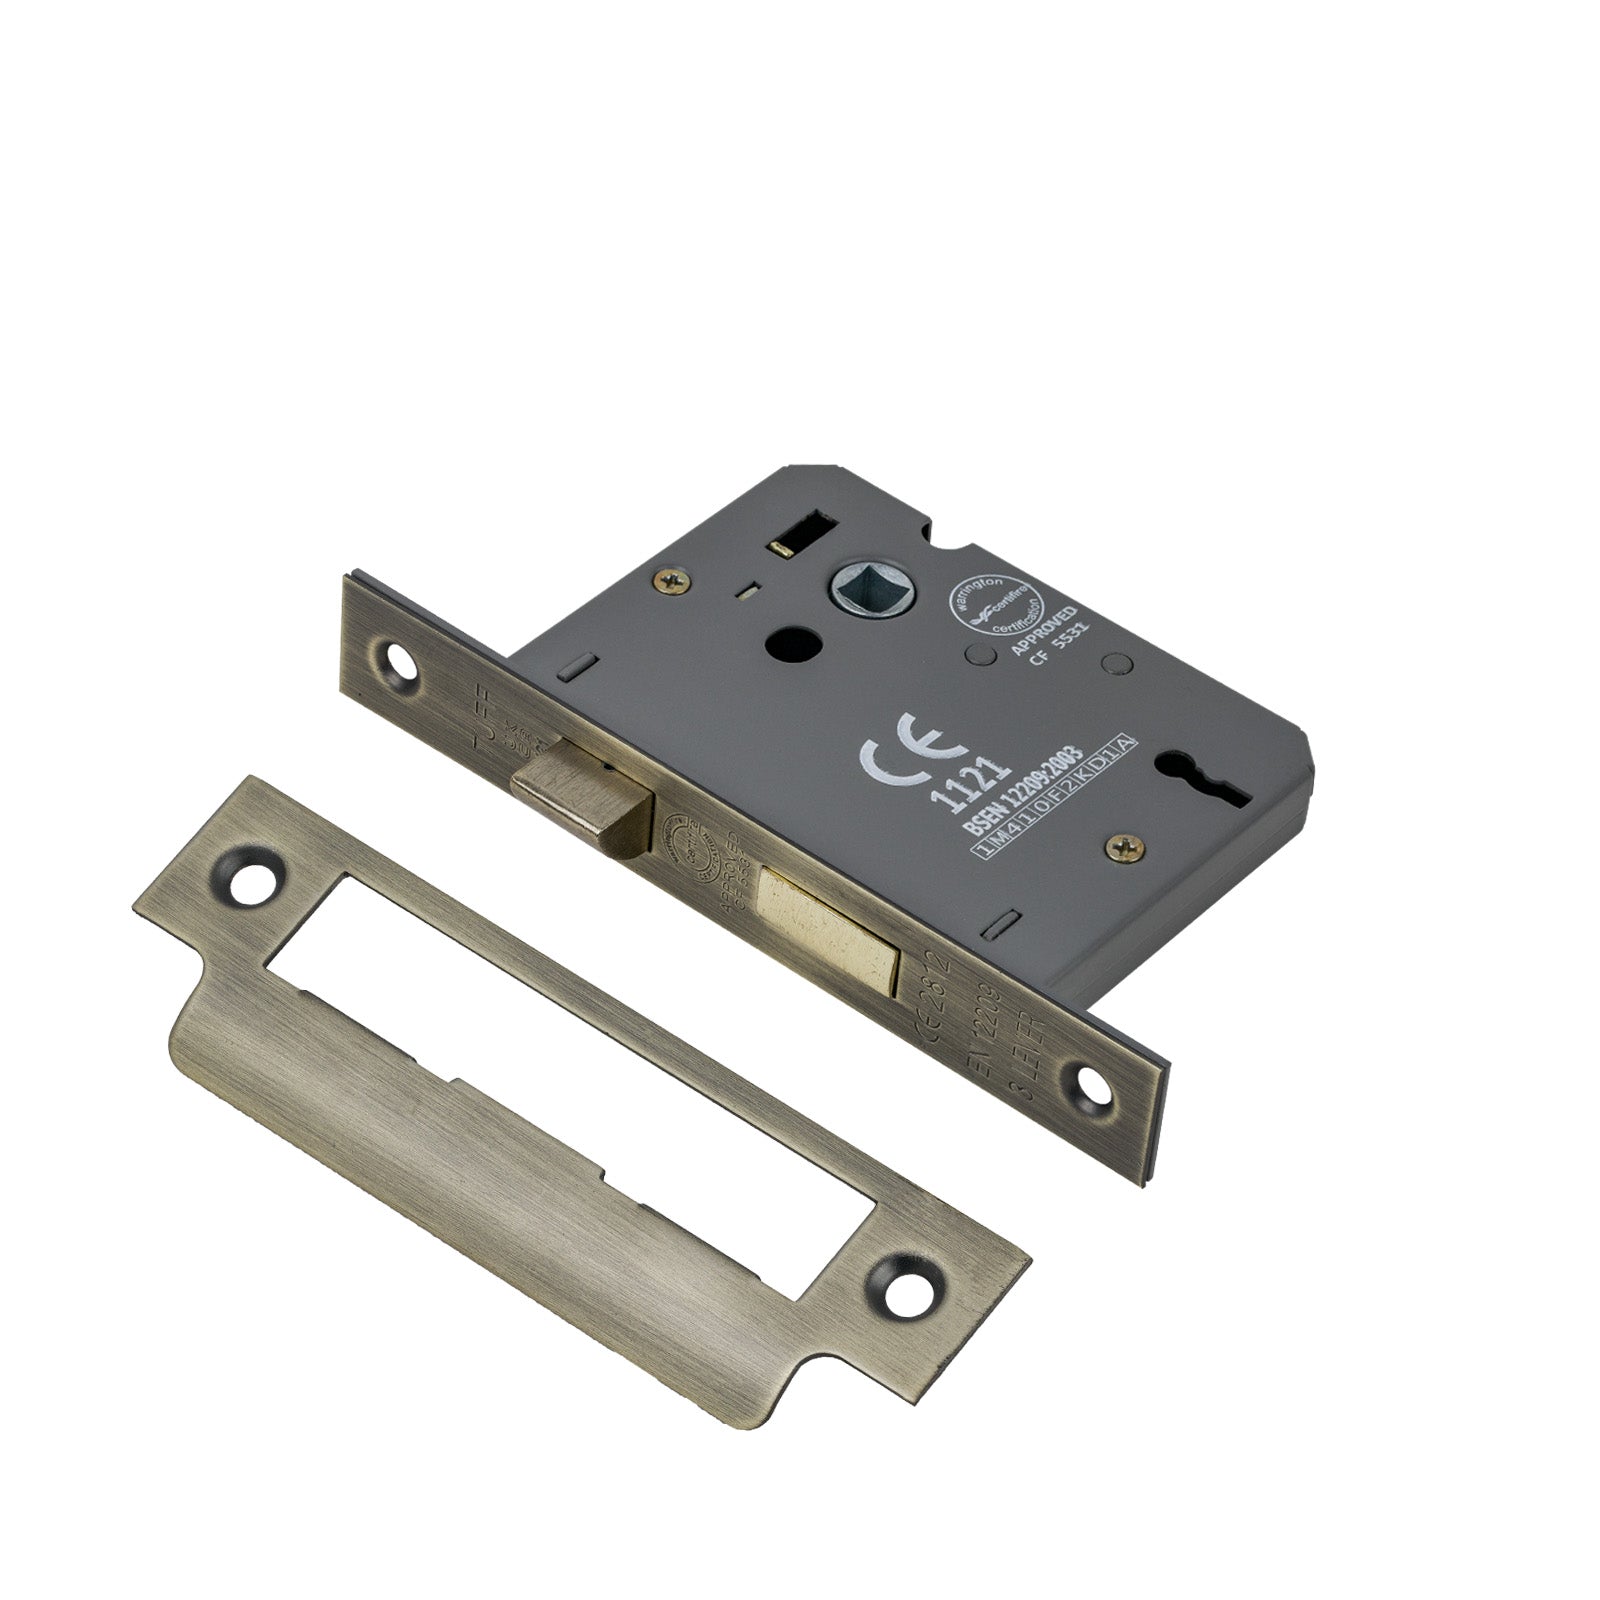 SHOW 3 Lever Sash Lock - 3 Inch with Matt Antique Brass finished forend and striker plate